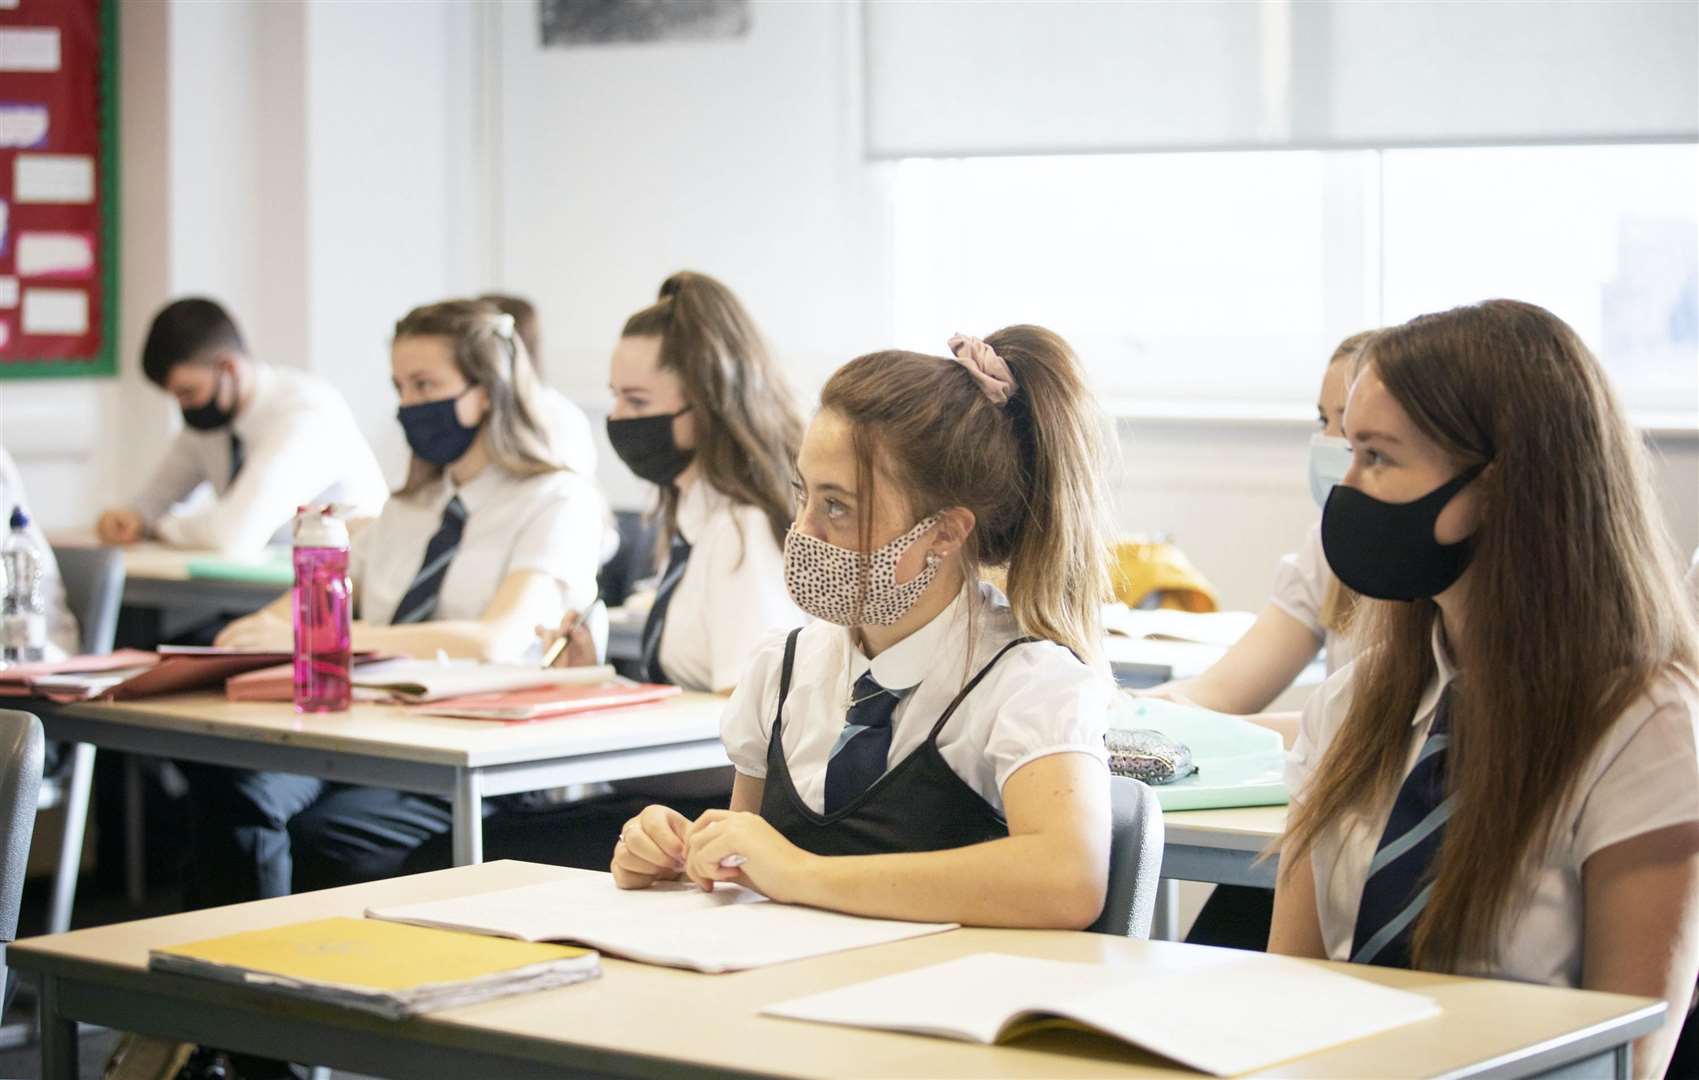 There are growing calls to scrap the bubble system in favour of regular testing, to keep pupils in lessons